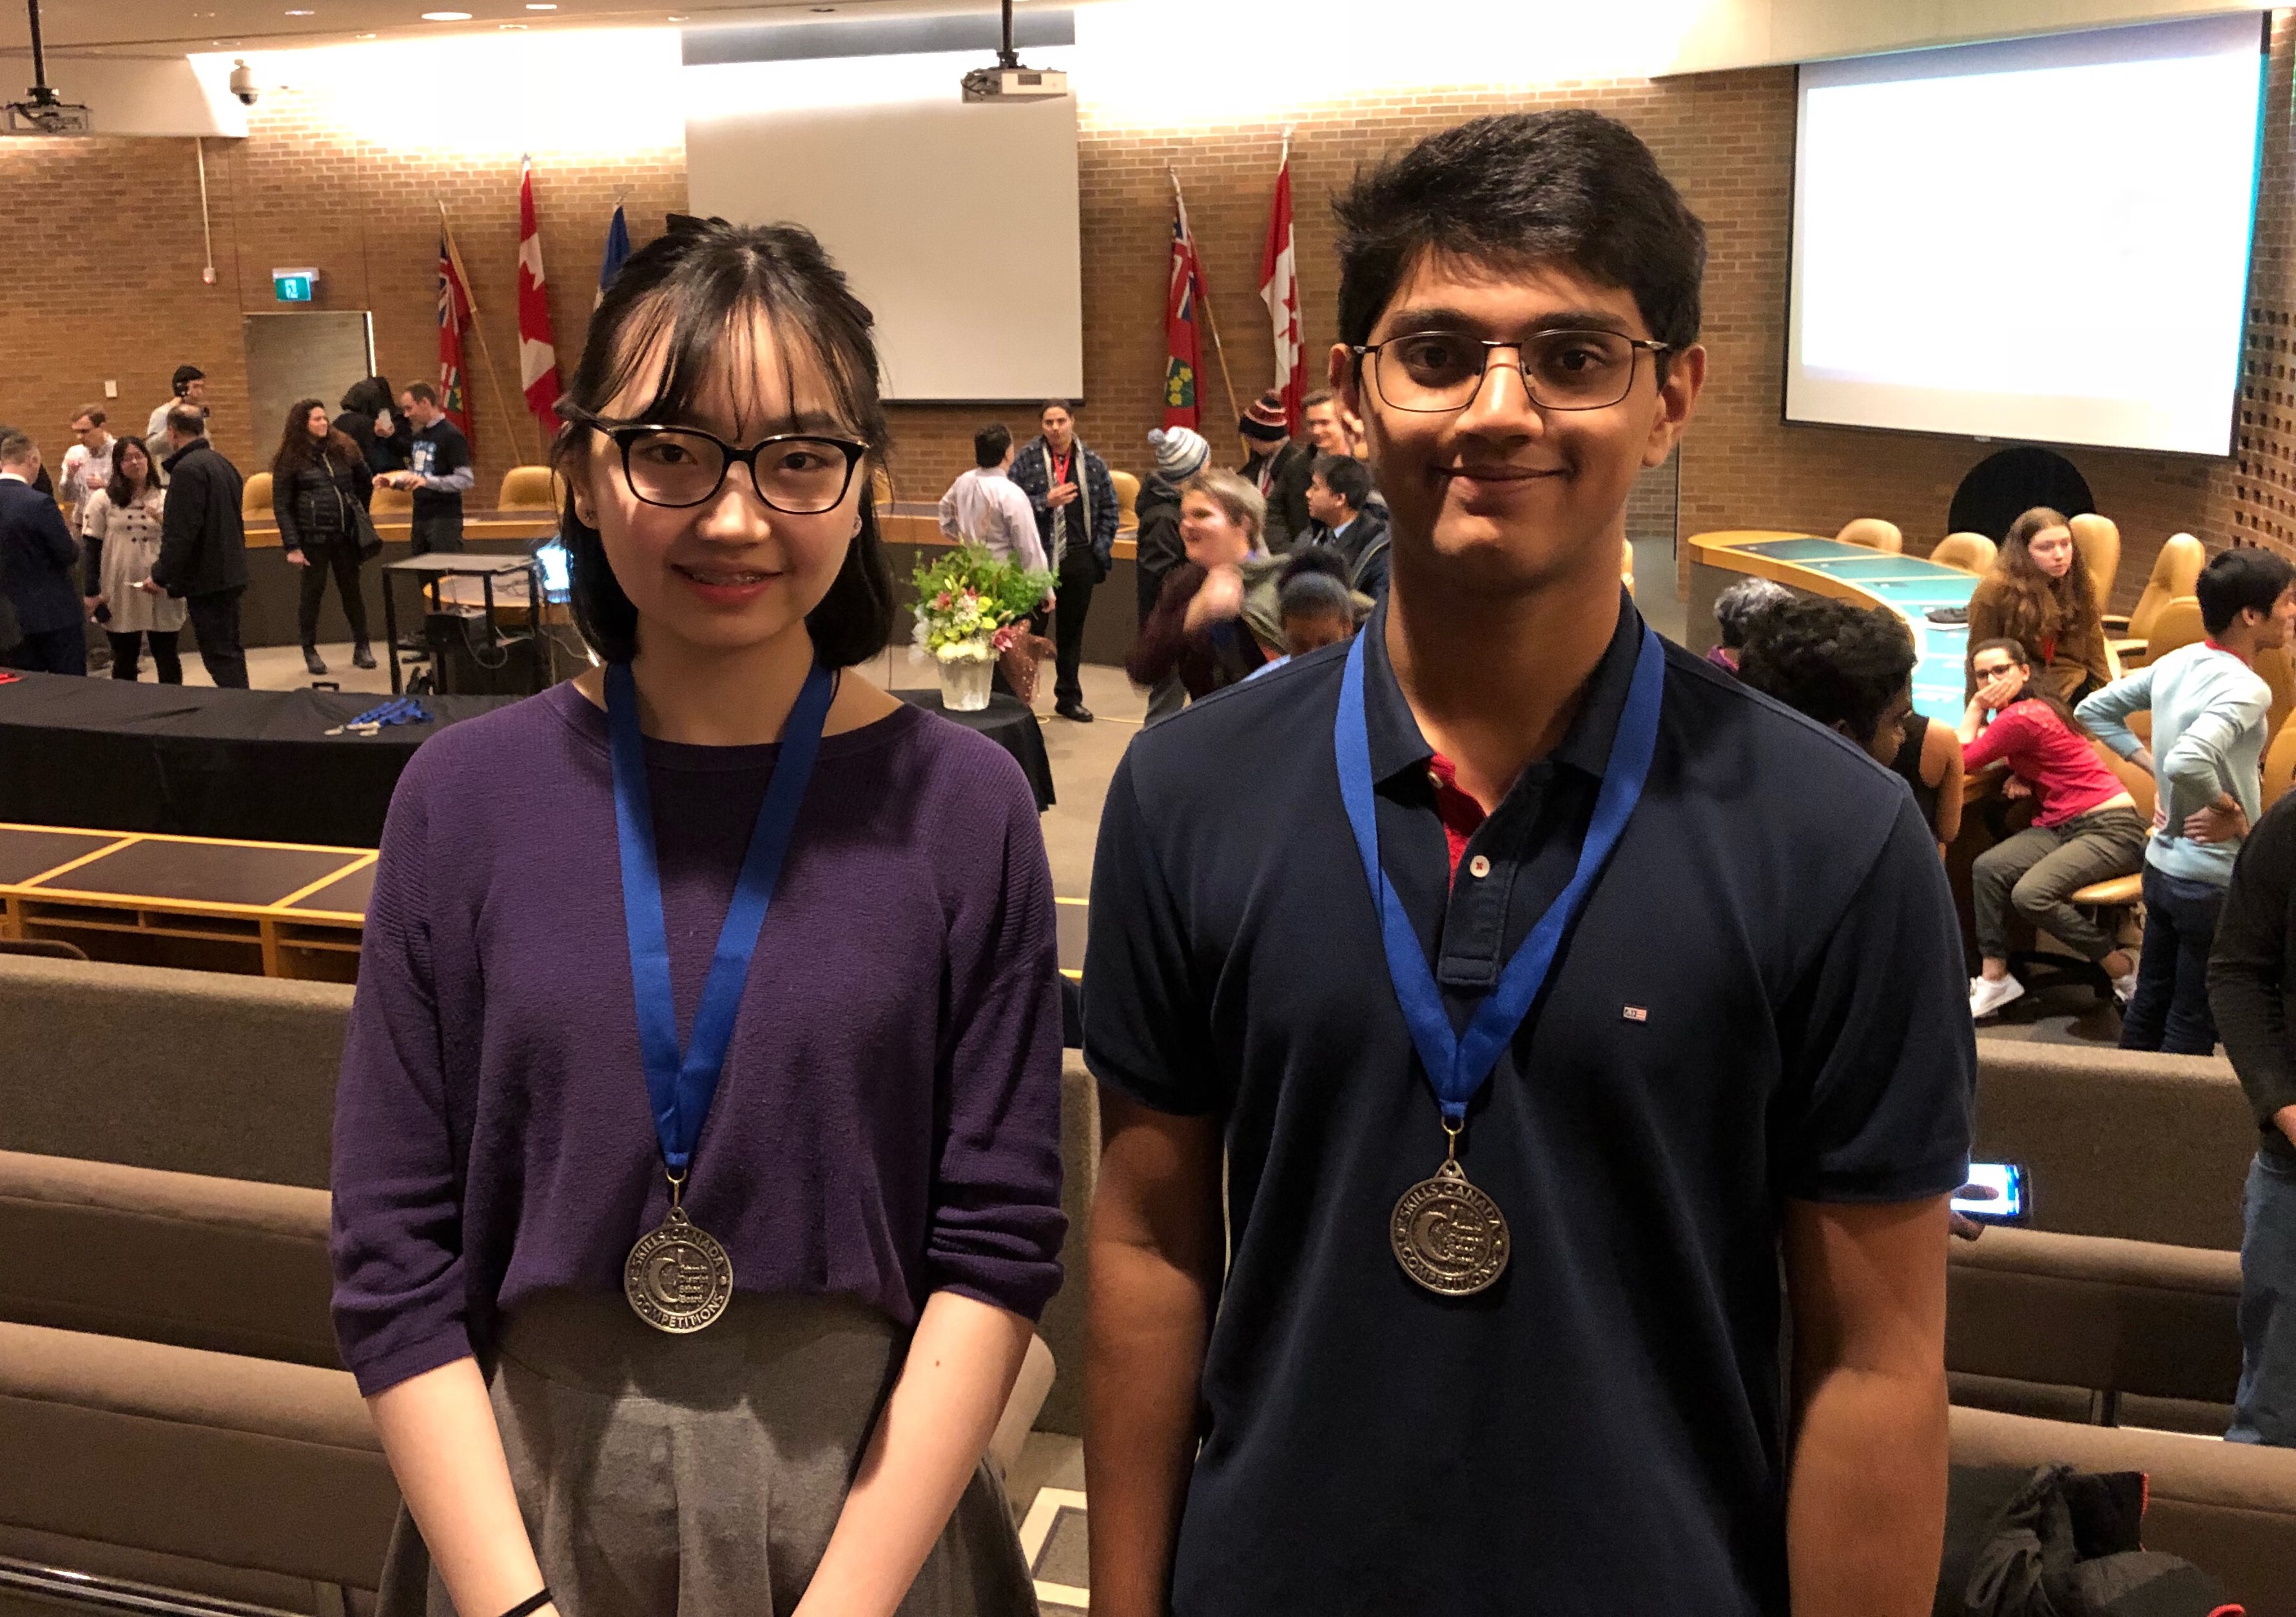 2017/18 TDSB Skills Competition Award Winners Open Gallery